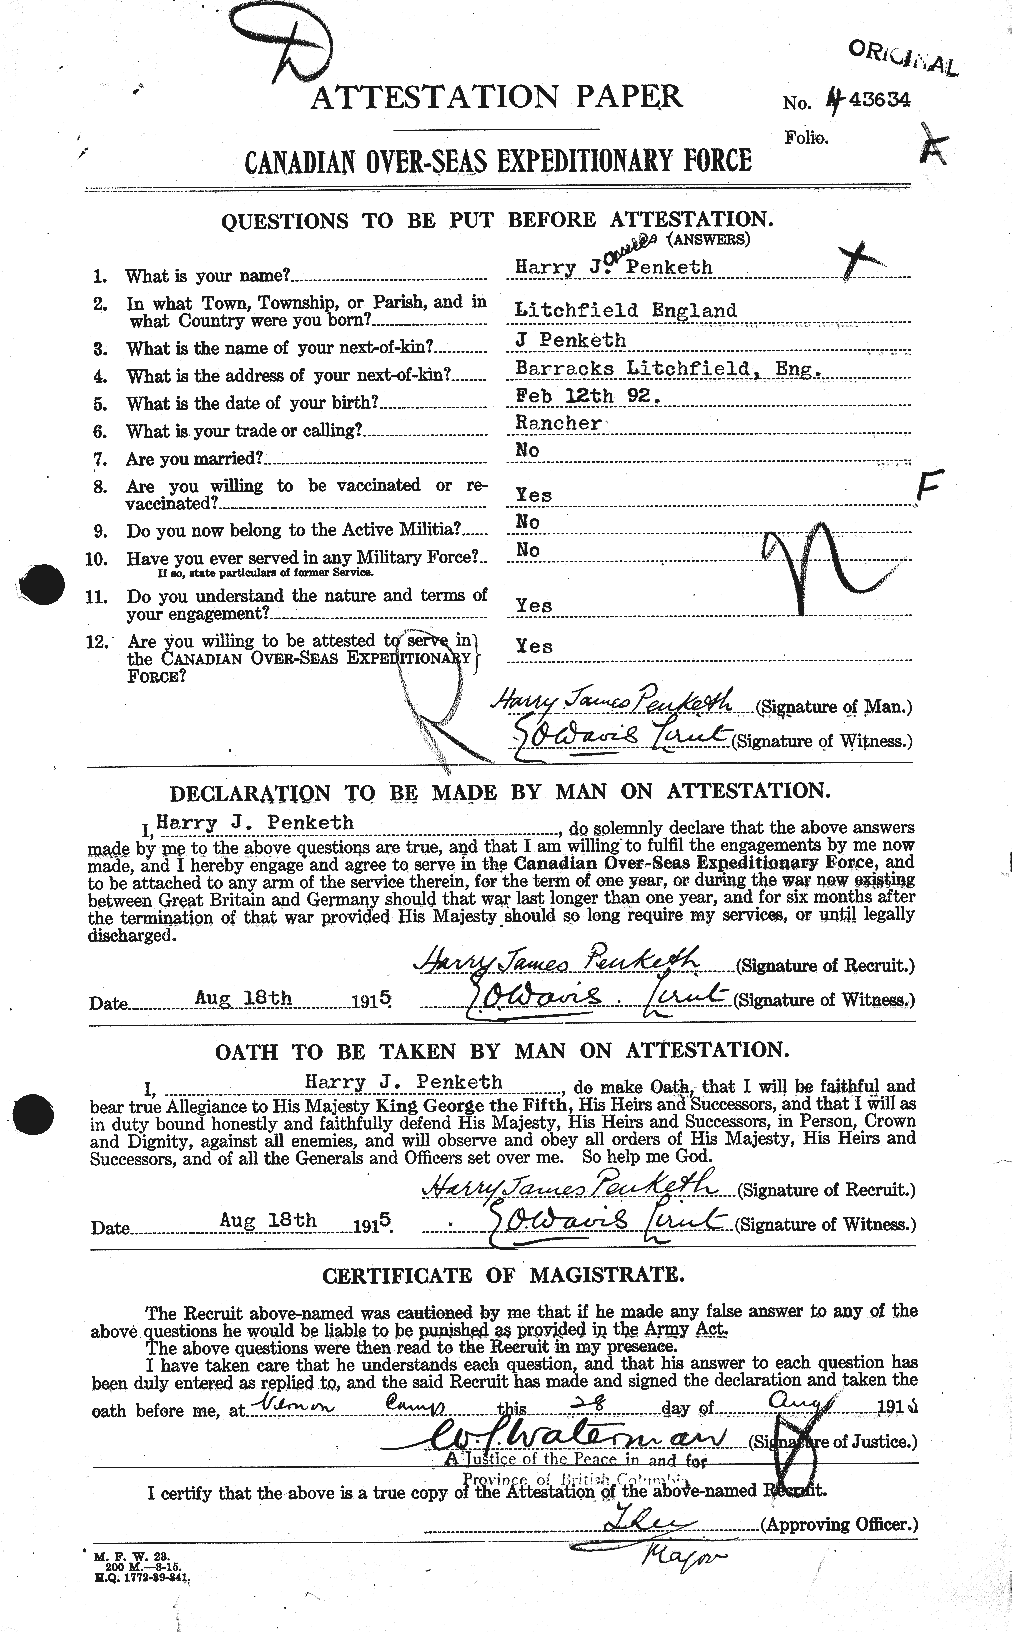 Personnel Records of the First World War - CEF 573040a